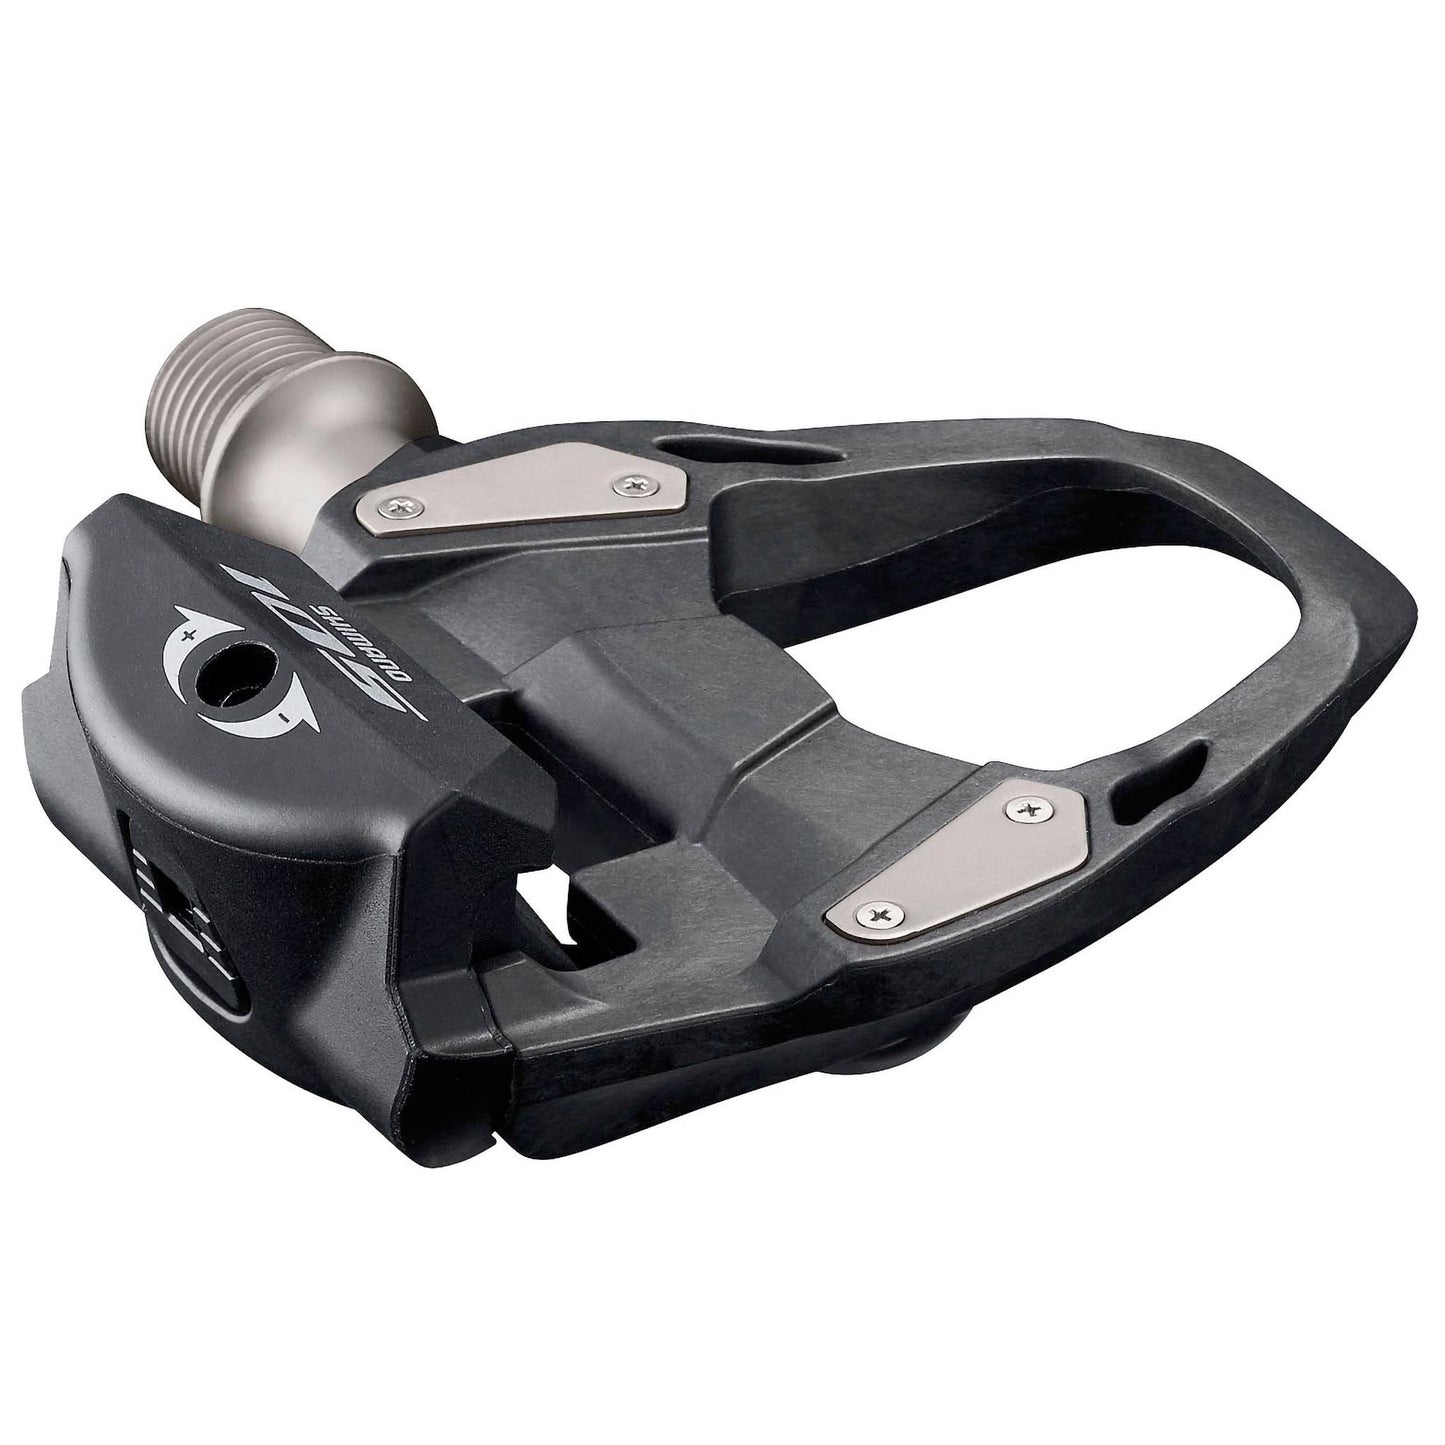 Shimano PD-R7000 SPD-SL Carbon Road Pedals with cleats buy at Woolys Wheels Sydney